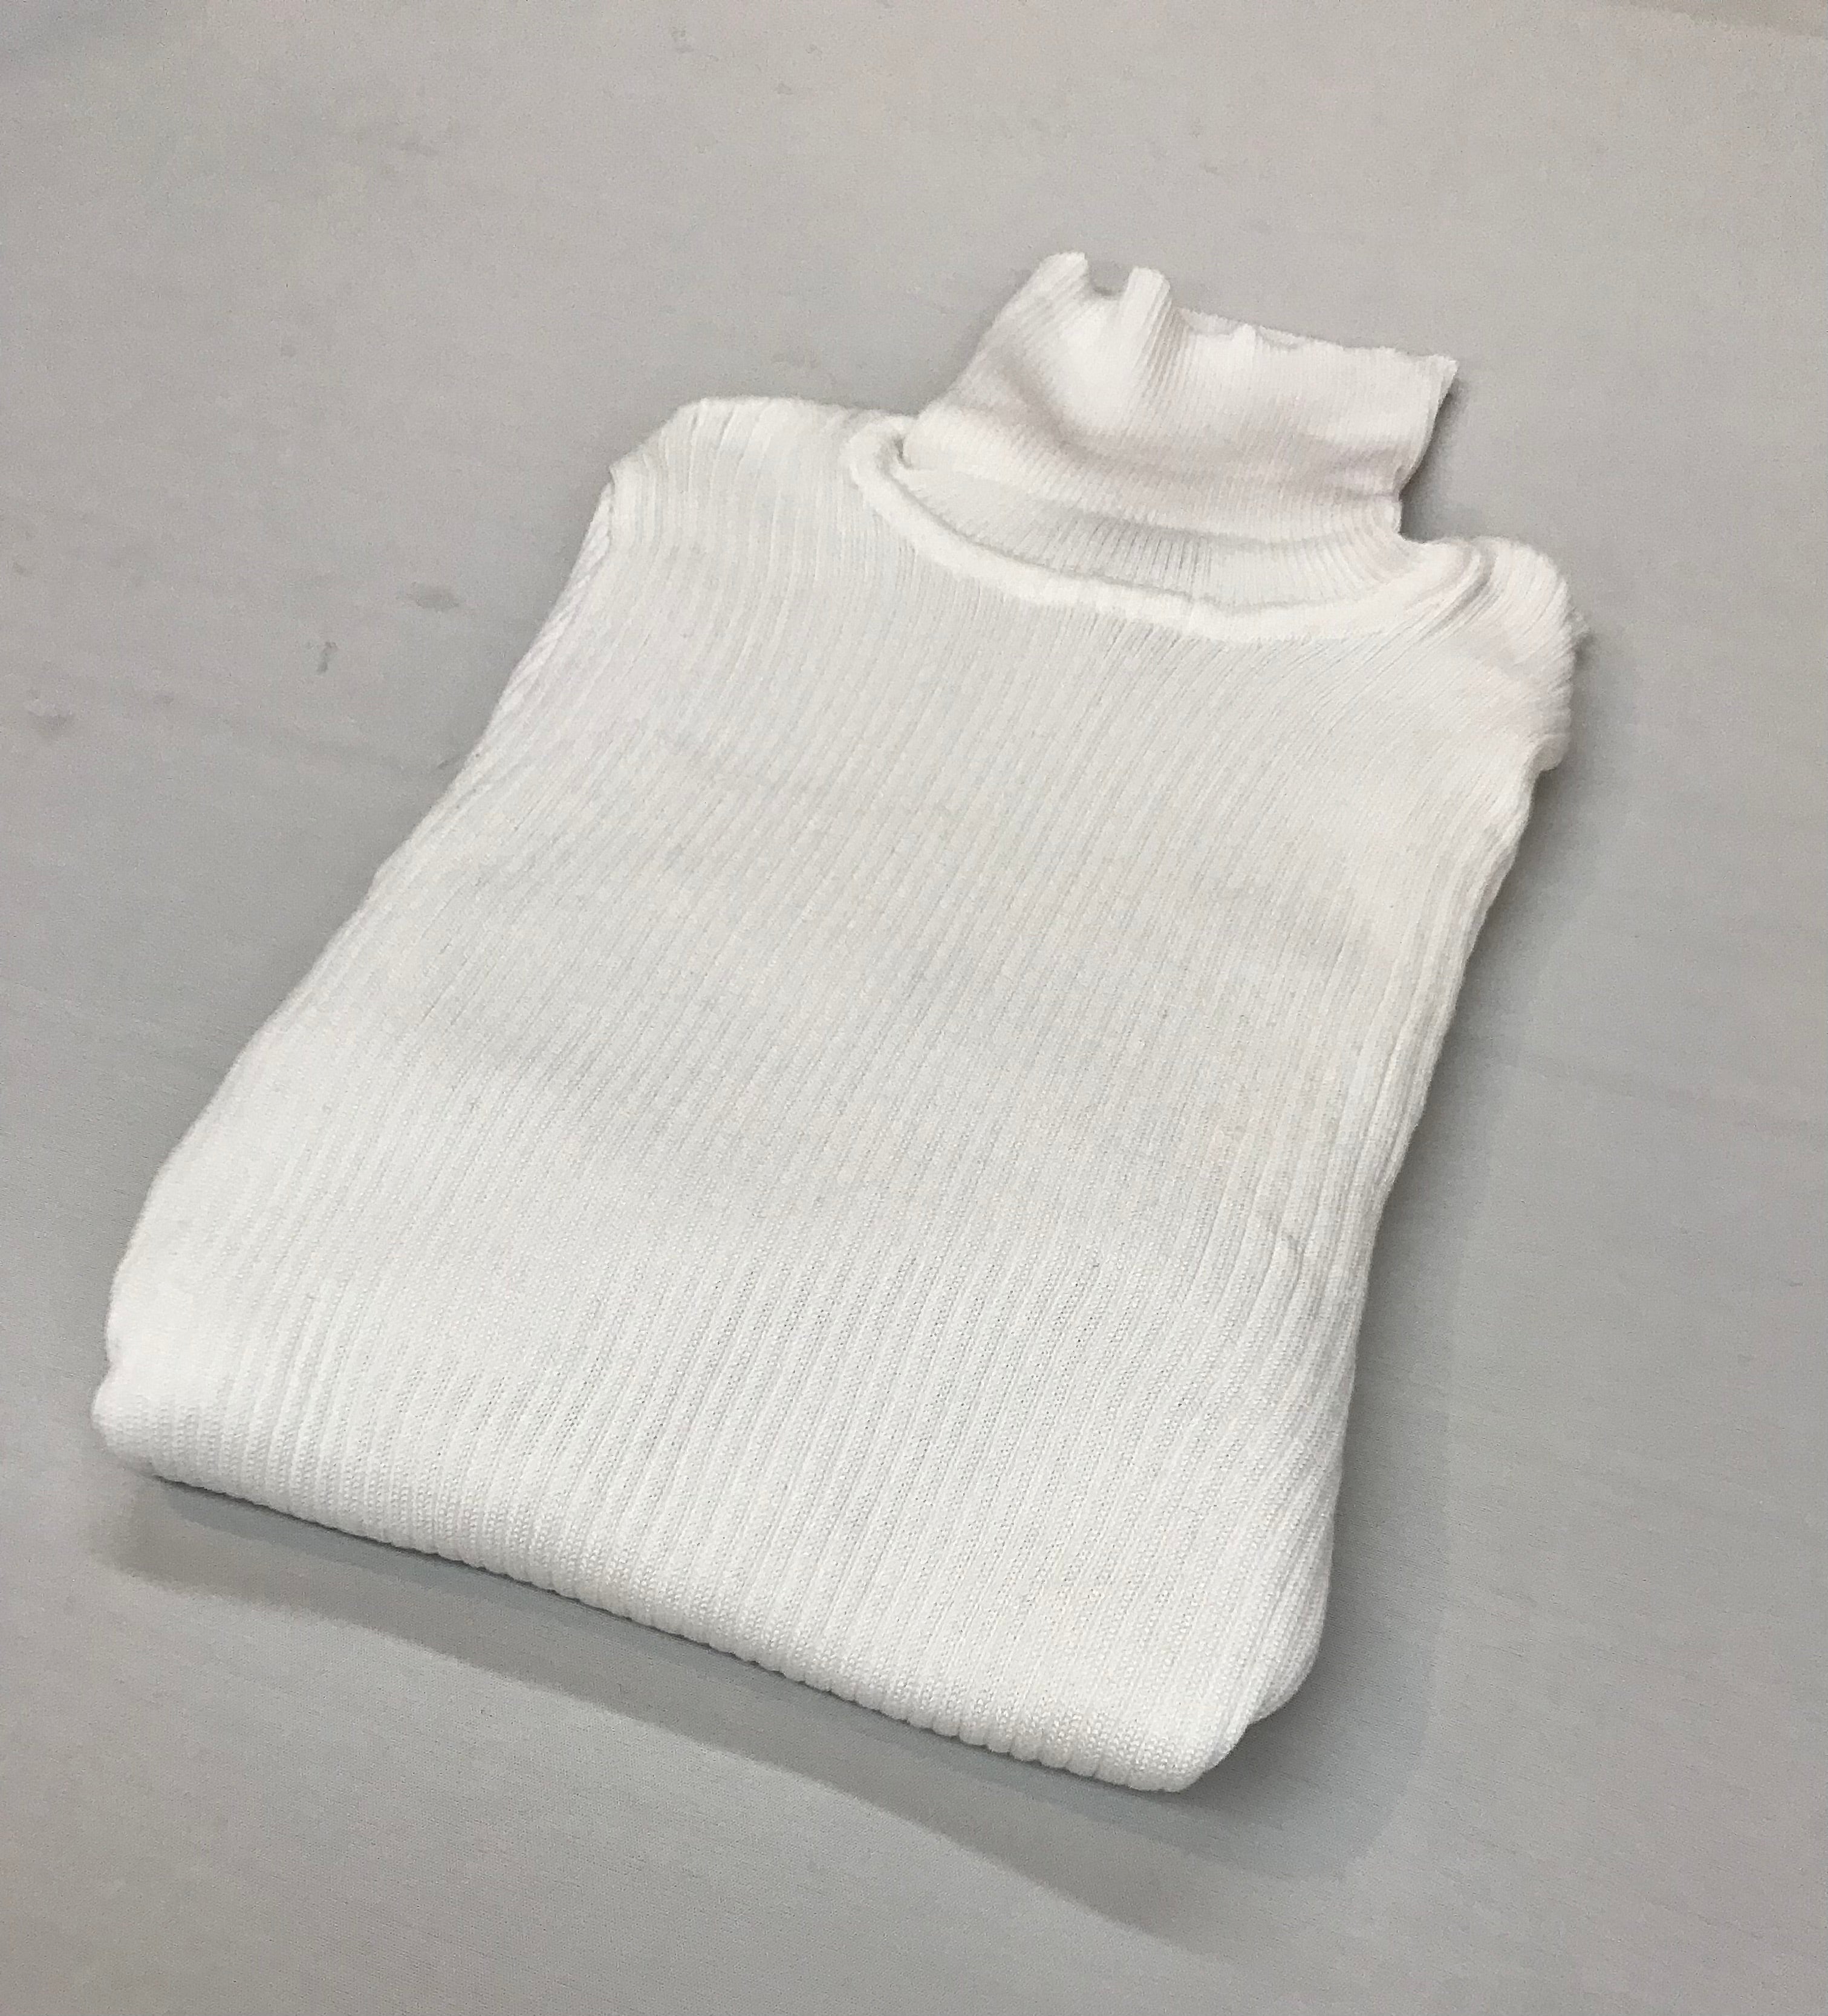 White Fitted Ribbed Turtleneck